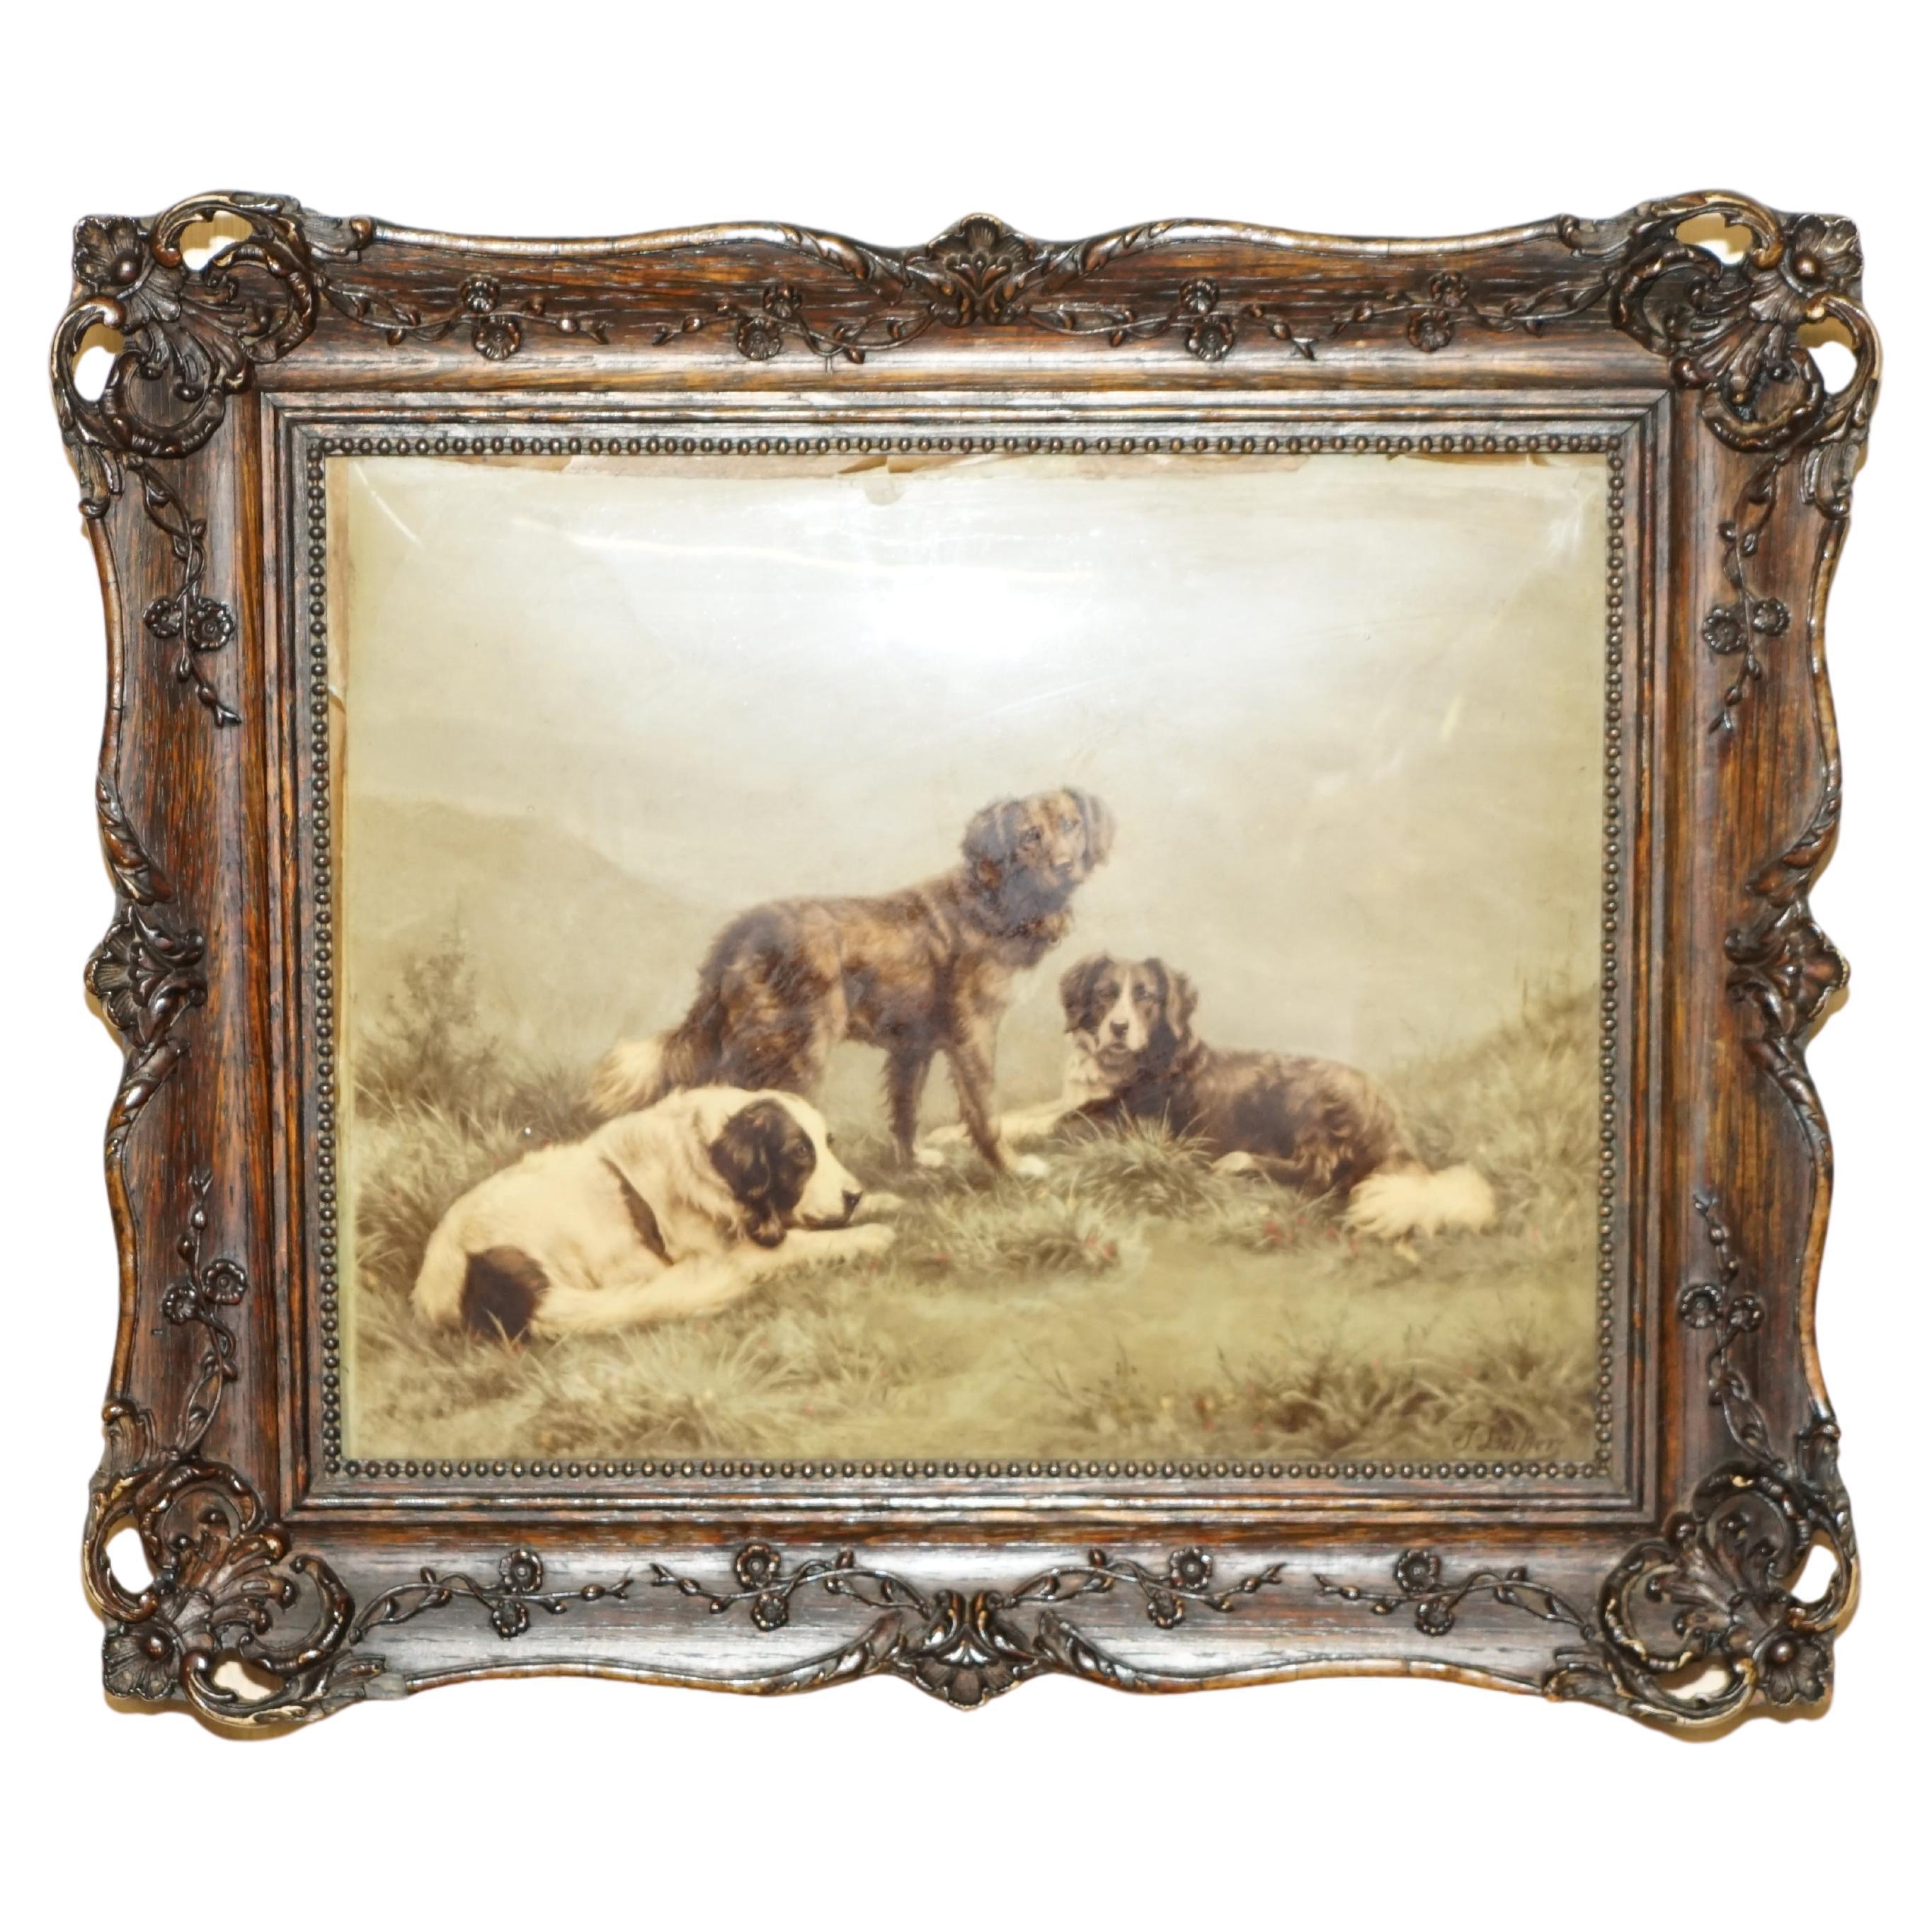 ONE OF TWO ANTIQUE CRYSTOLEUM HAND CARVED HARDWOOD FRAMED PiCTURES OF DOGSv